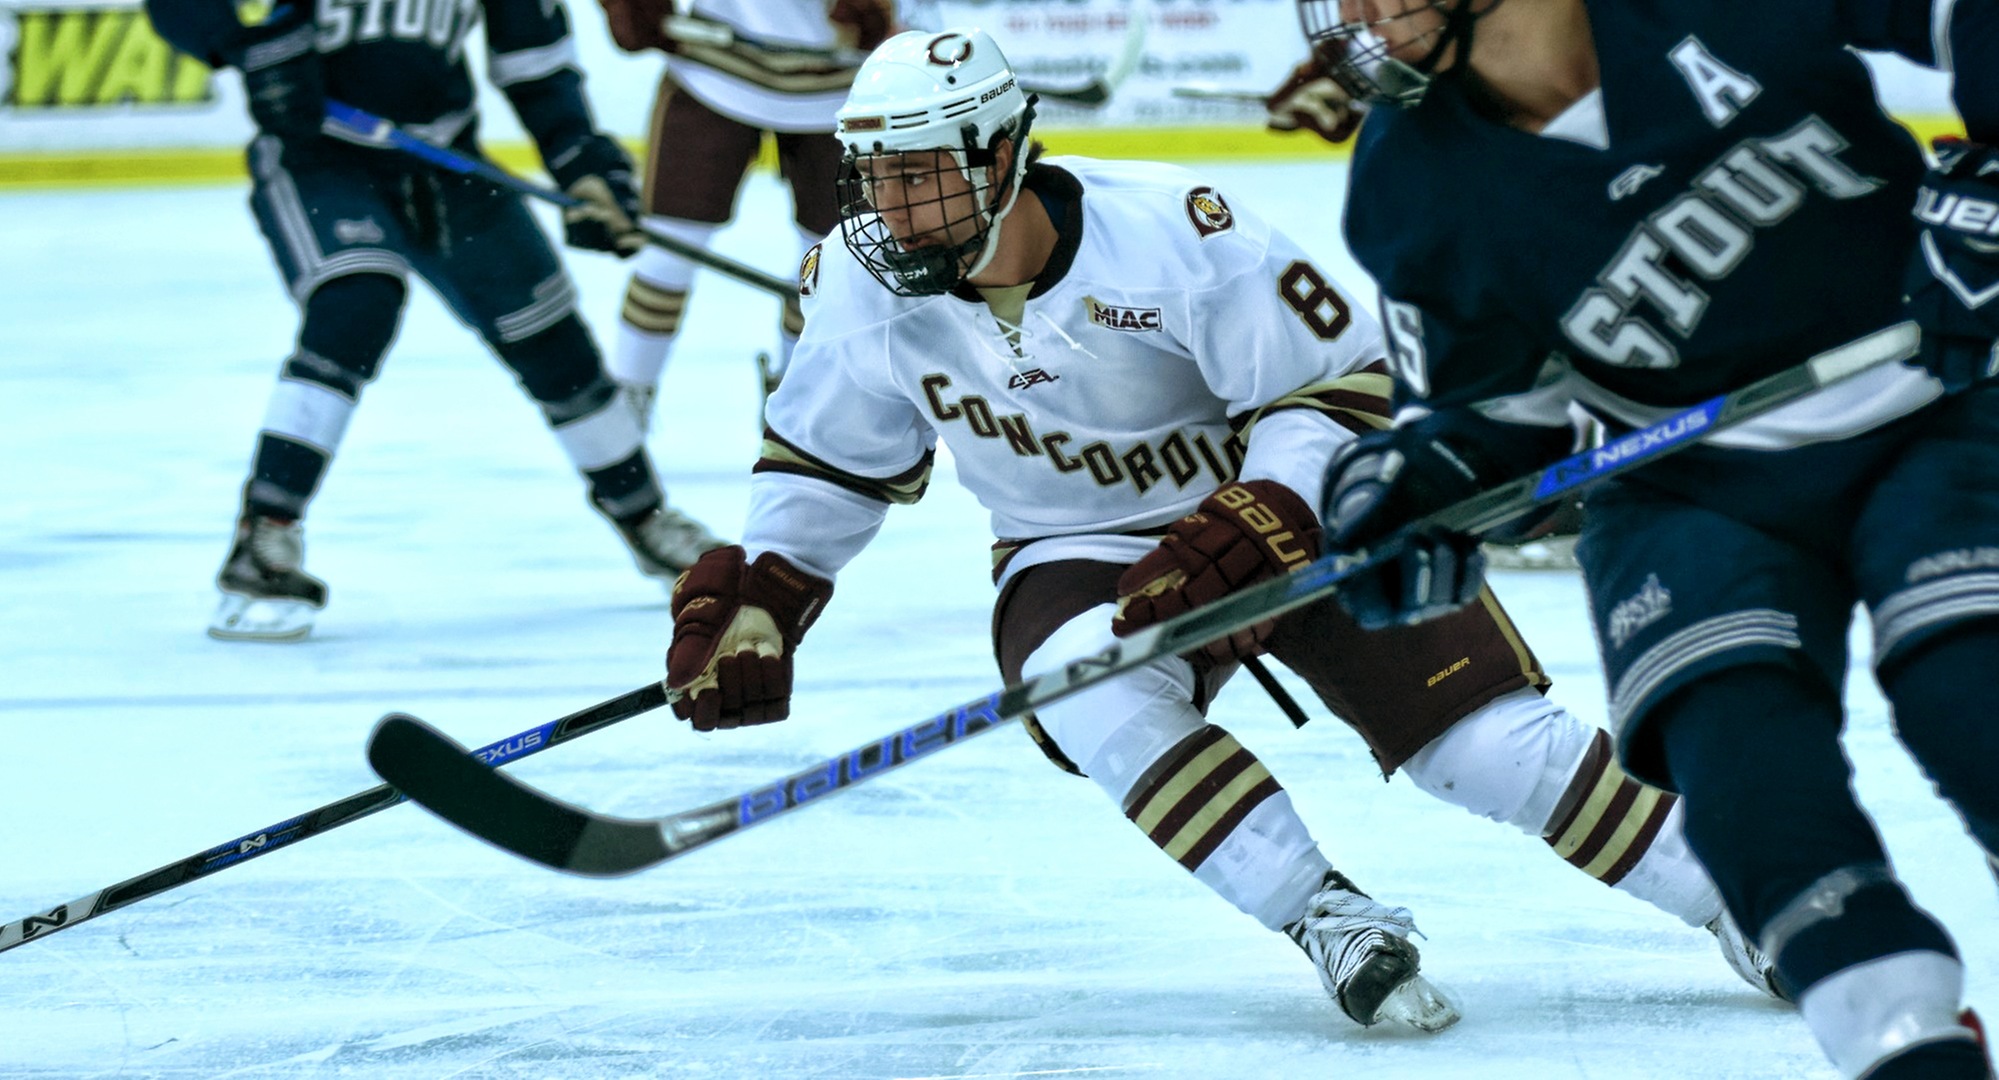 Junior Aaron Herdt crosses the blue line in the Cobbers' game with Wis.-Stout. He scored both of the goals for CC.